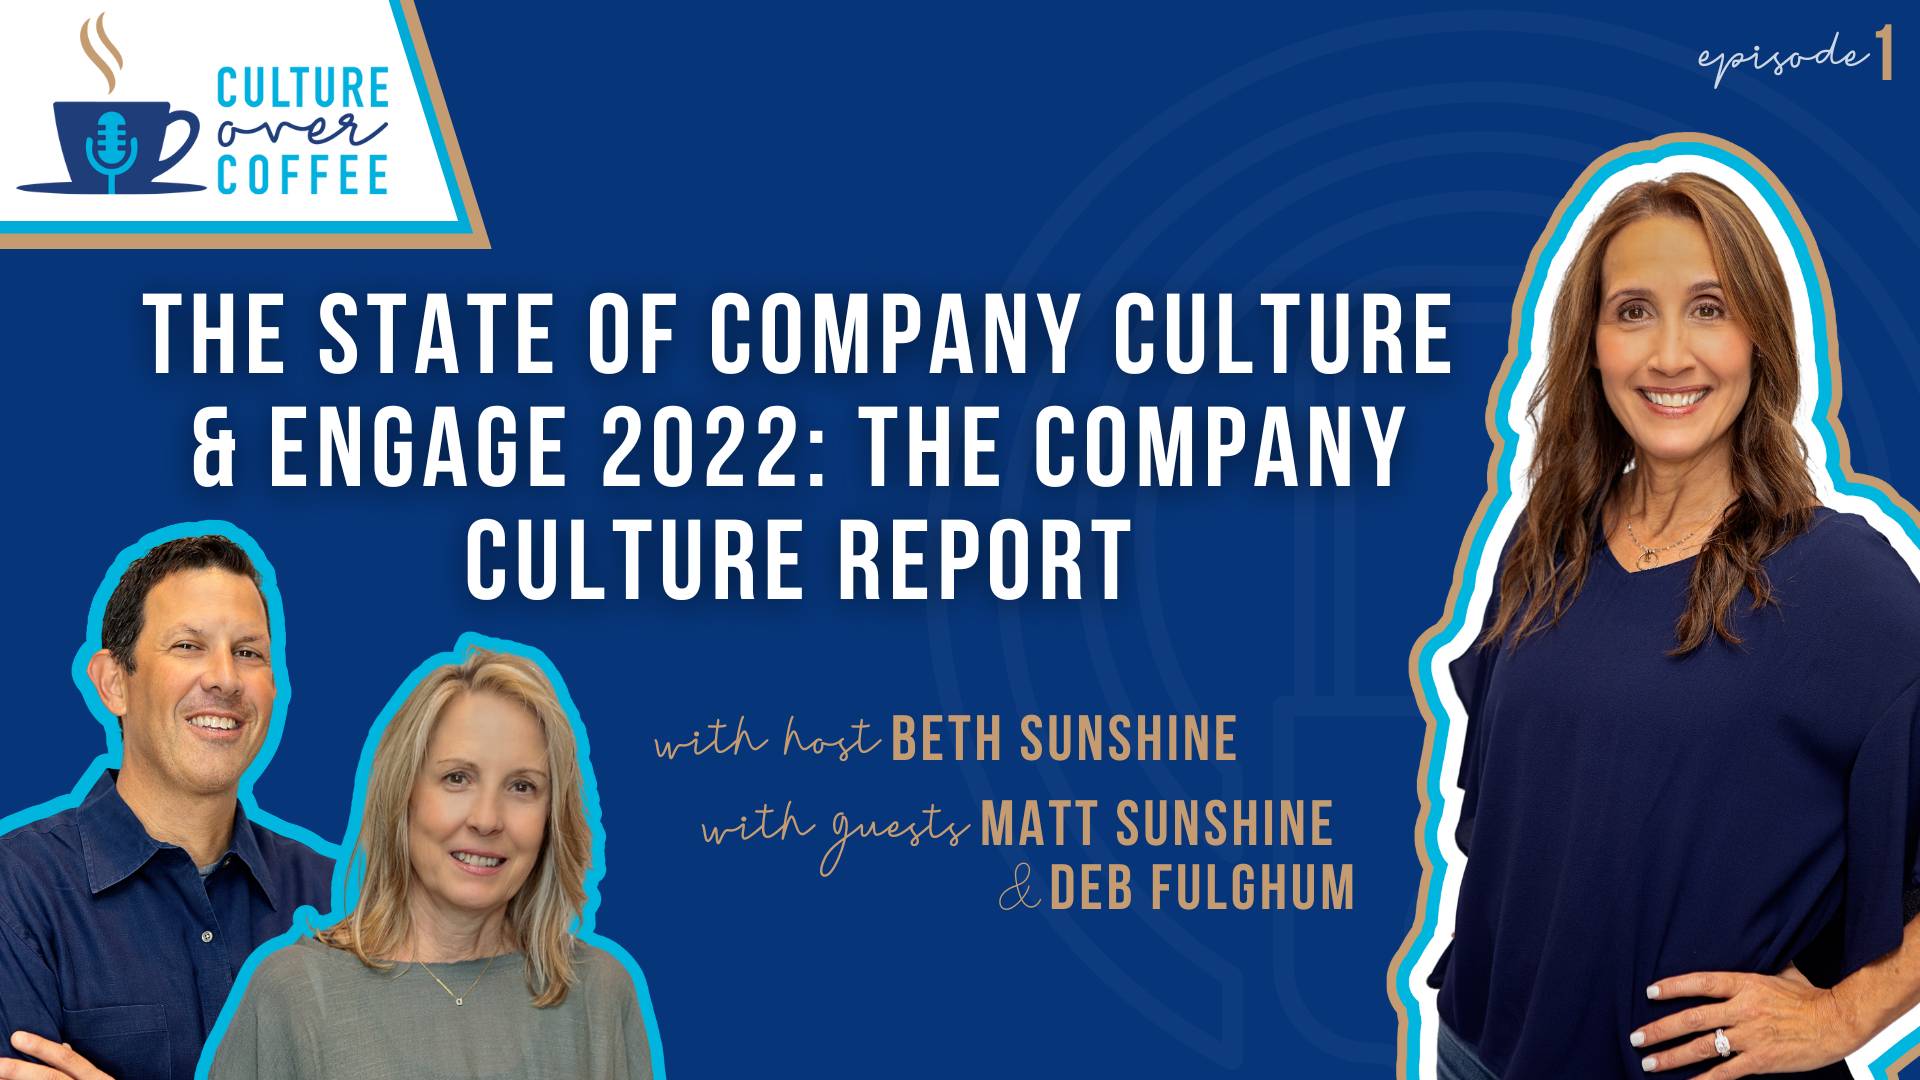 Culture Over Coffee — Why Company Culture Is Important